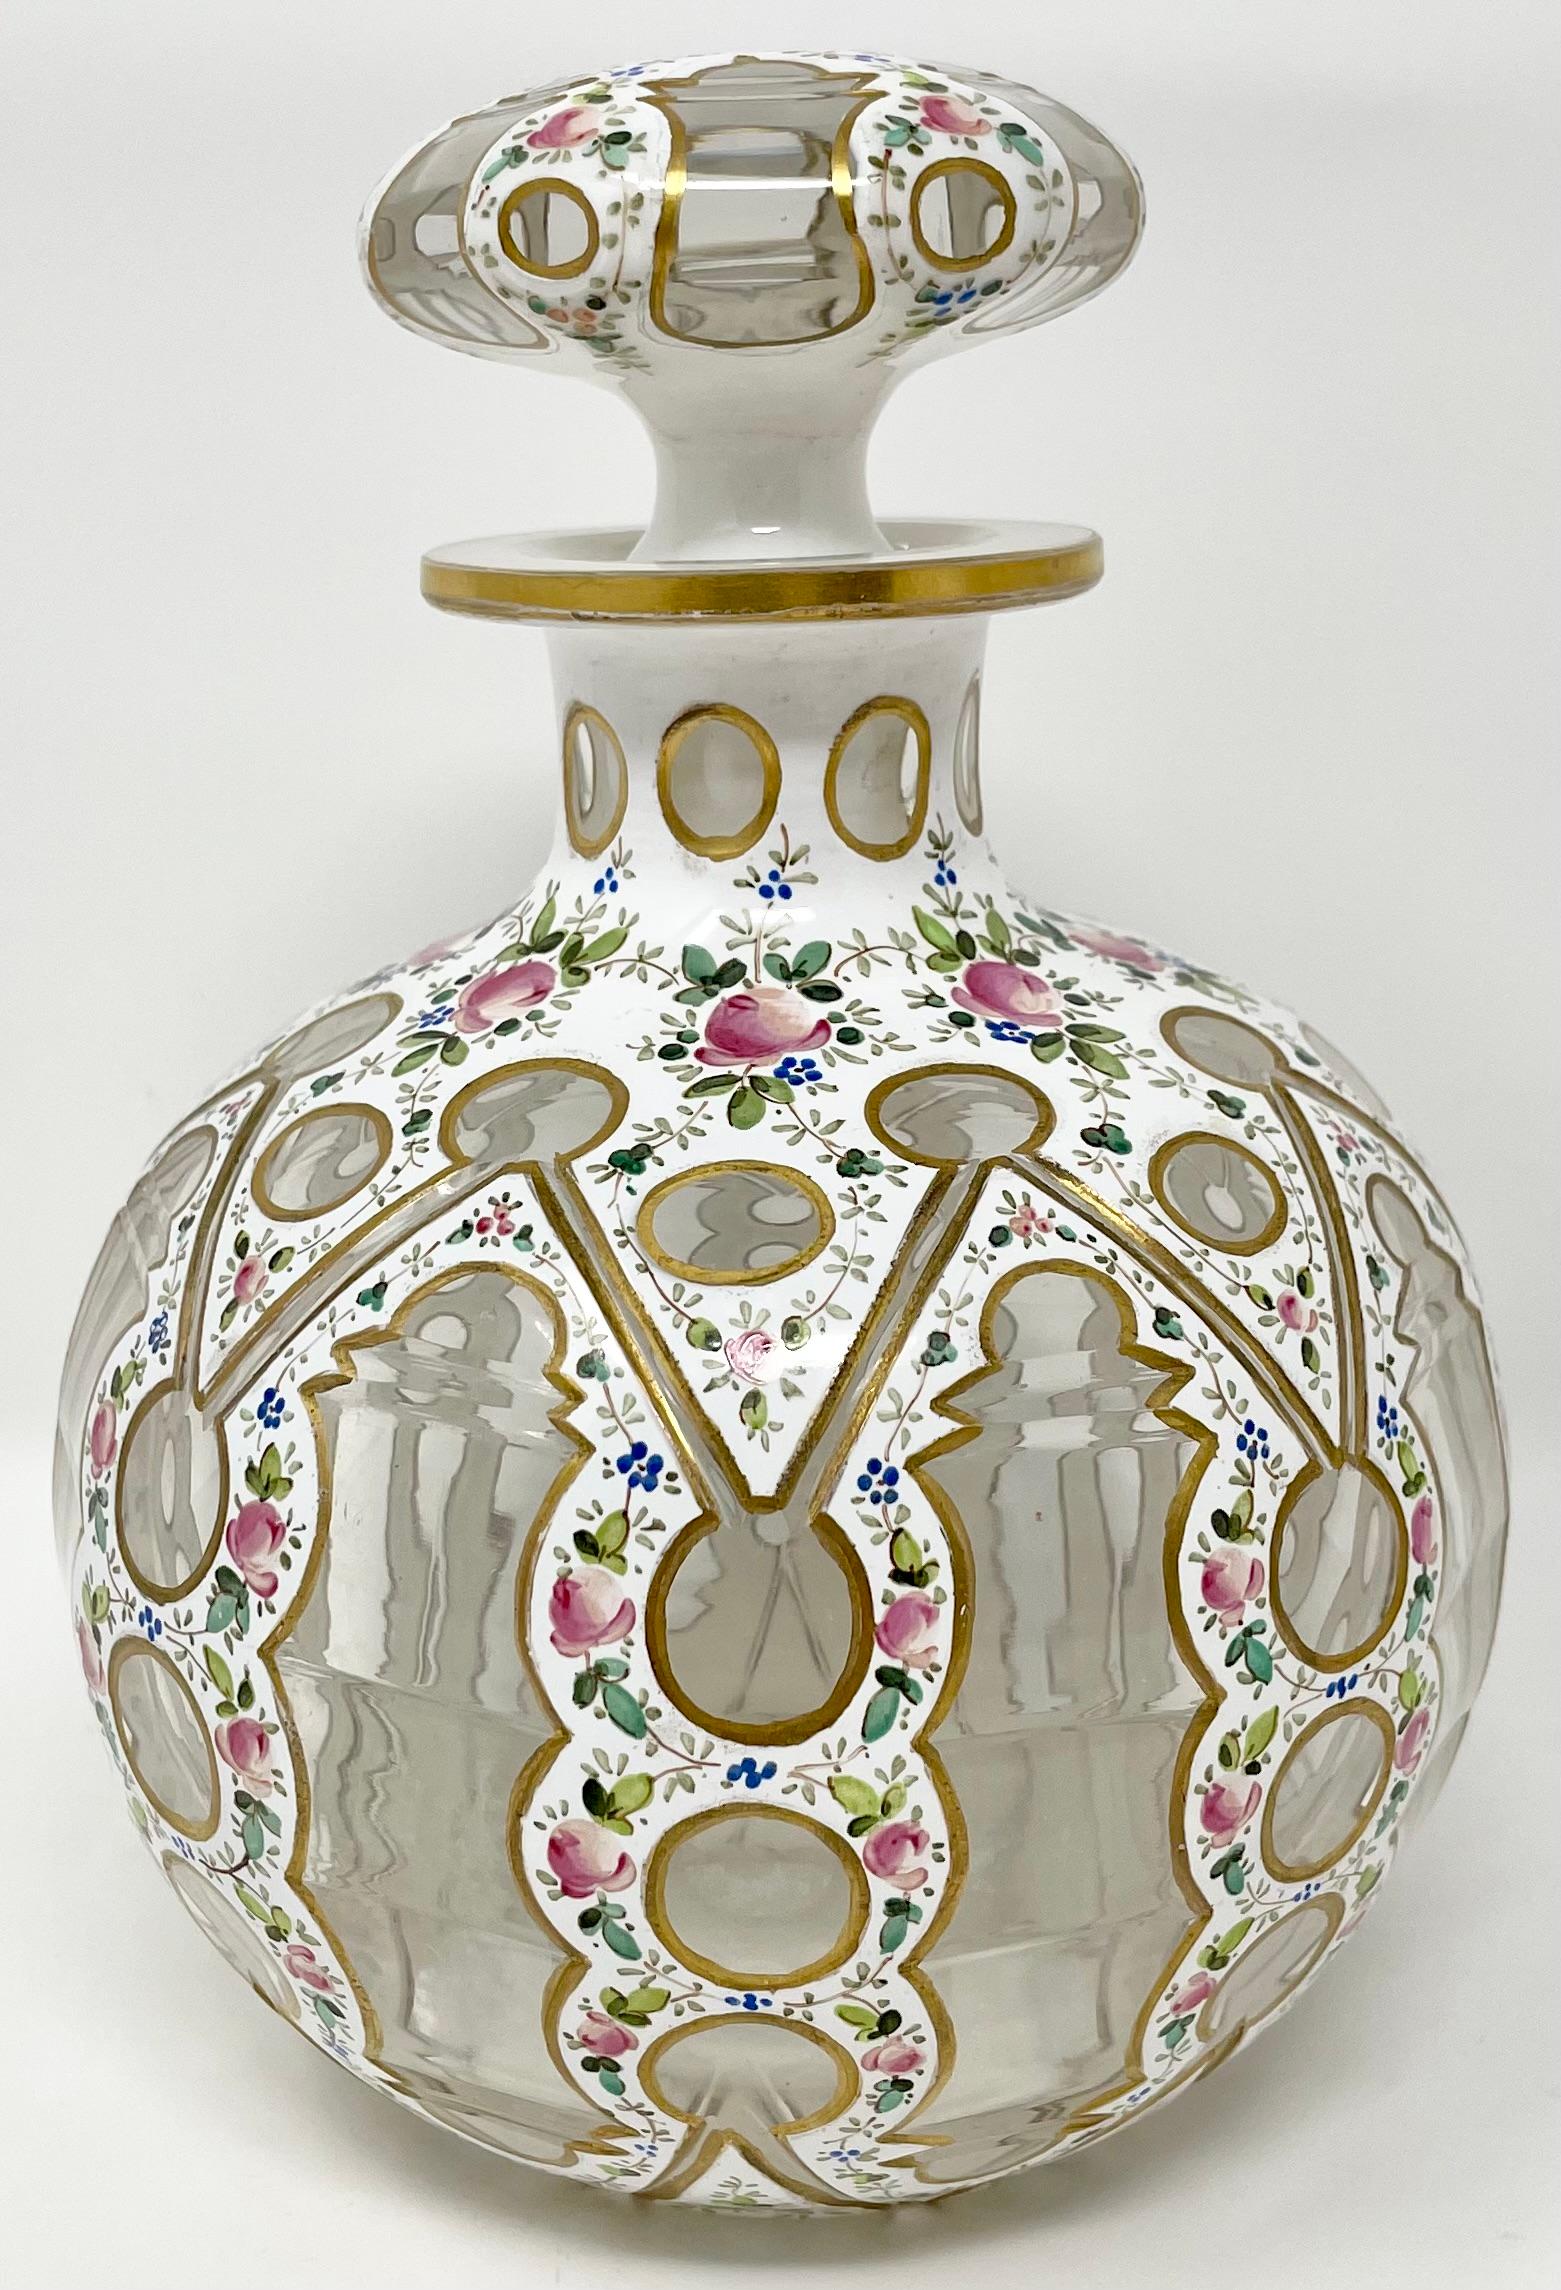 19th Century Pair Antique French Enameled Porcelain & Glass Perfume Bottles, Circa 1860-1870. For Sale